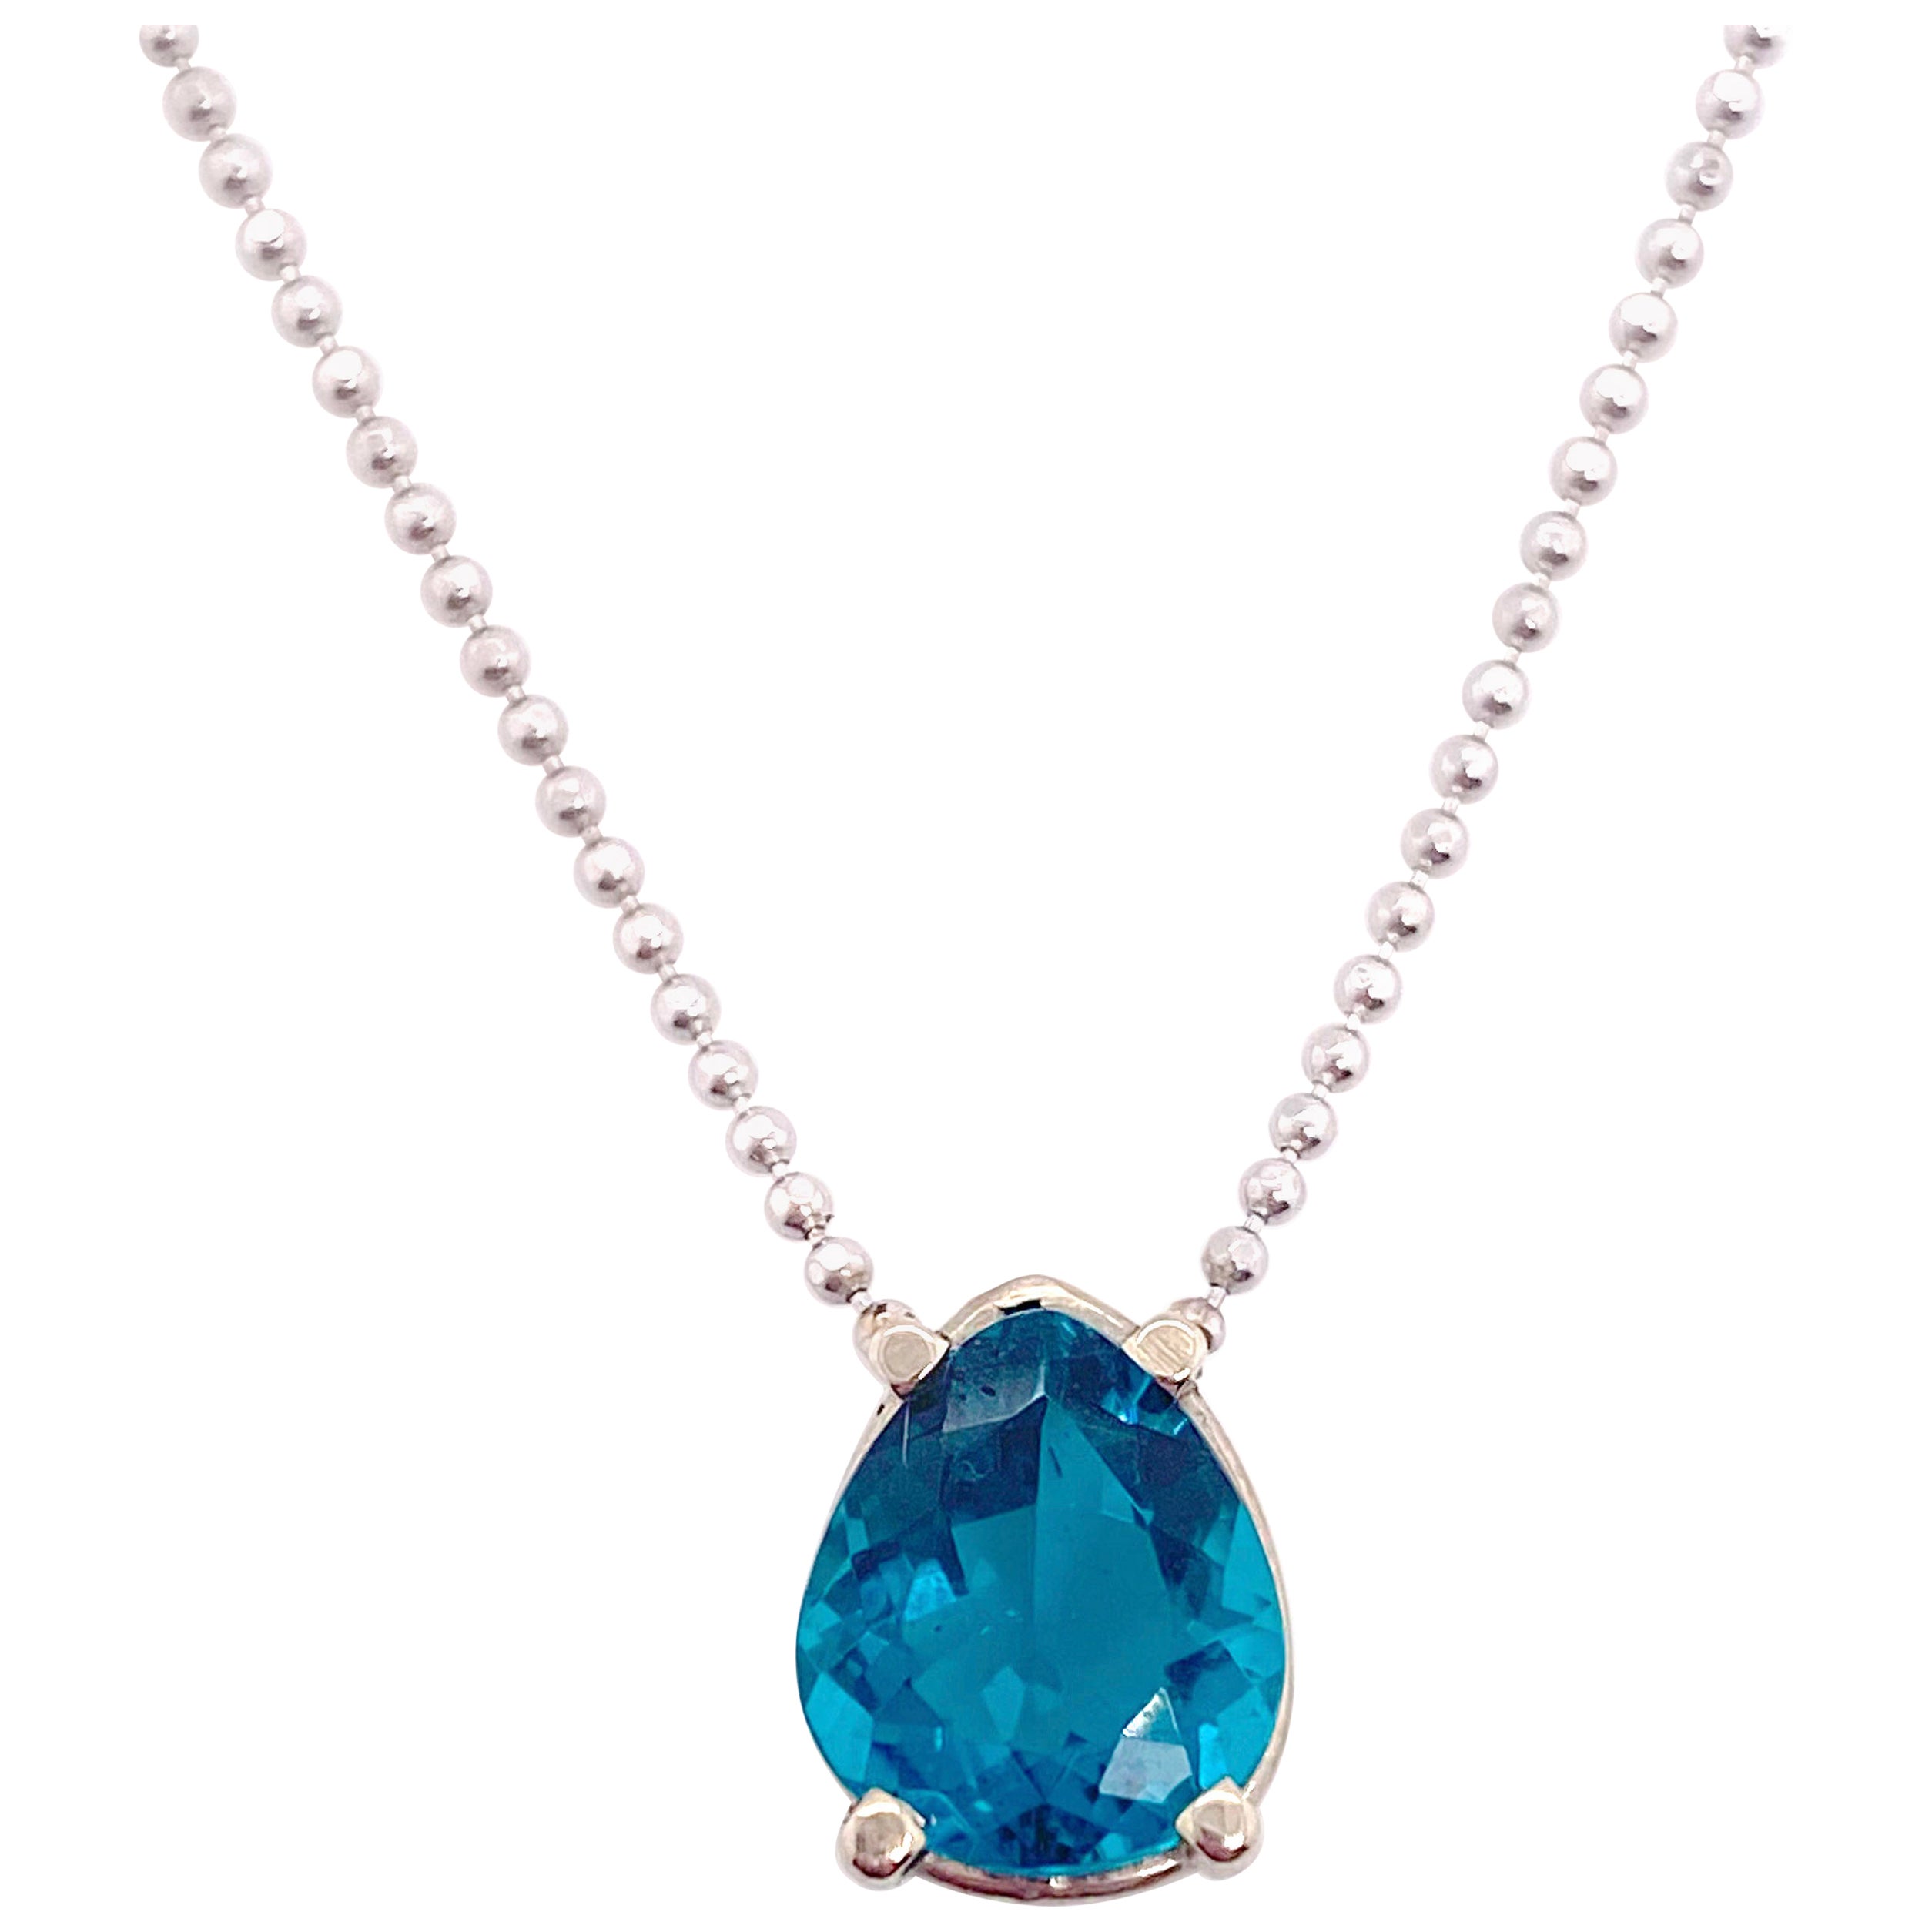 Apatite Pendant Necklace, White Gold, 1.80 Carats Pear Shaped Turquoise Color For Sale